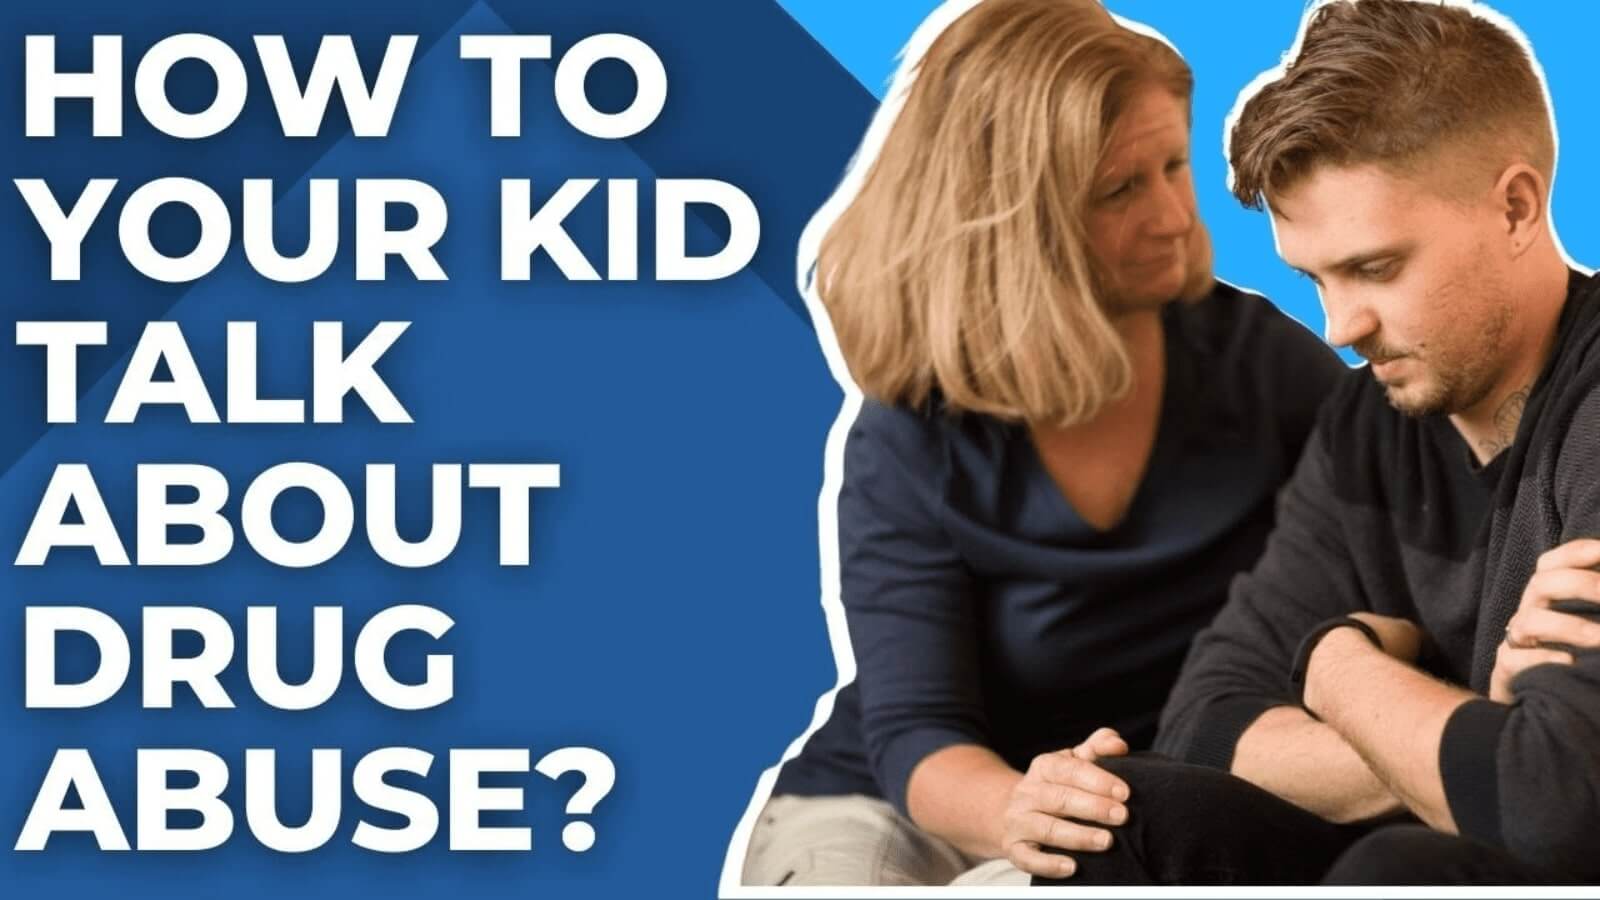 How Do You Talk To Your Child About Their Substance Use